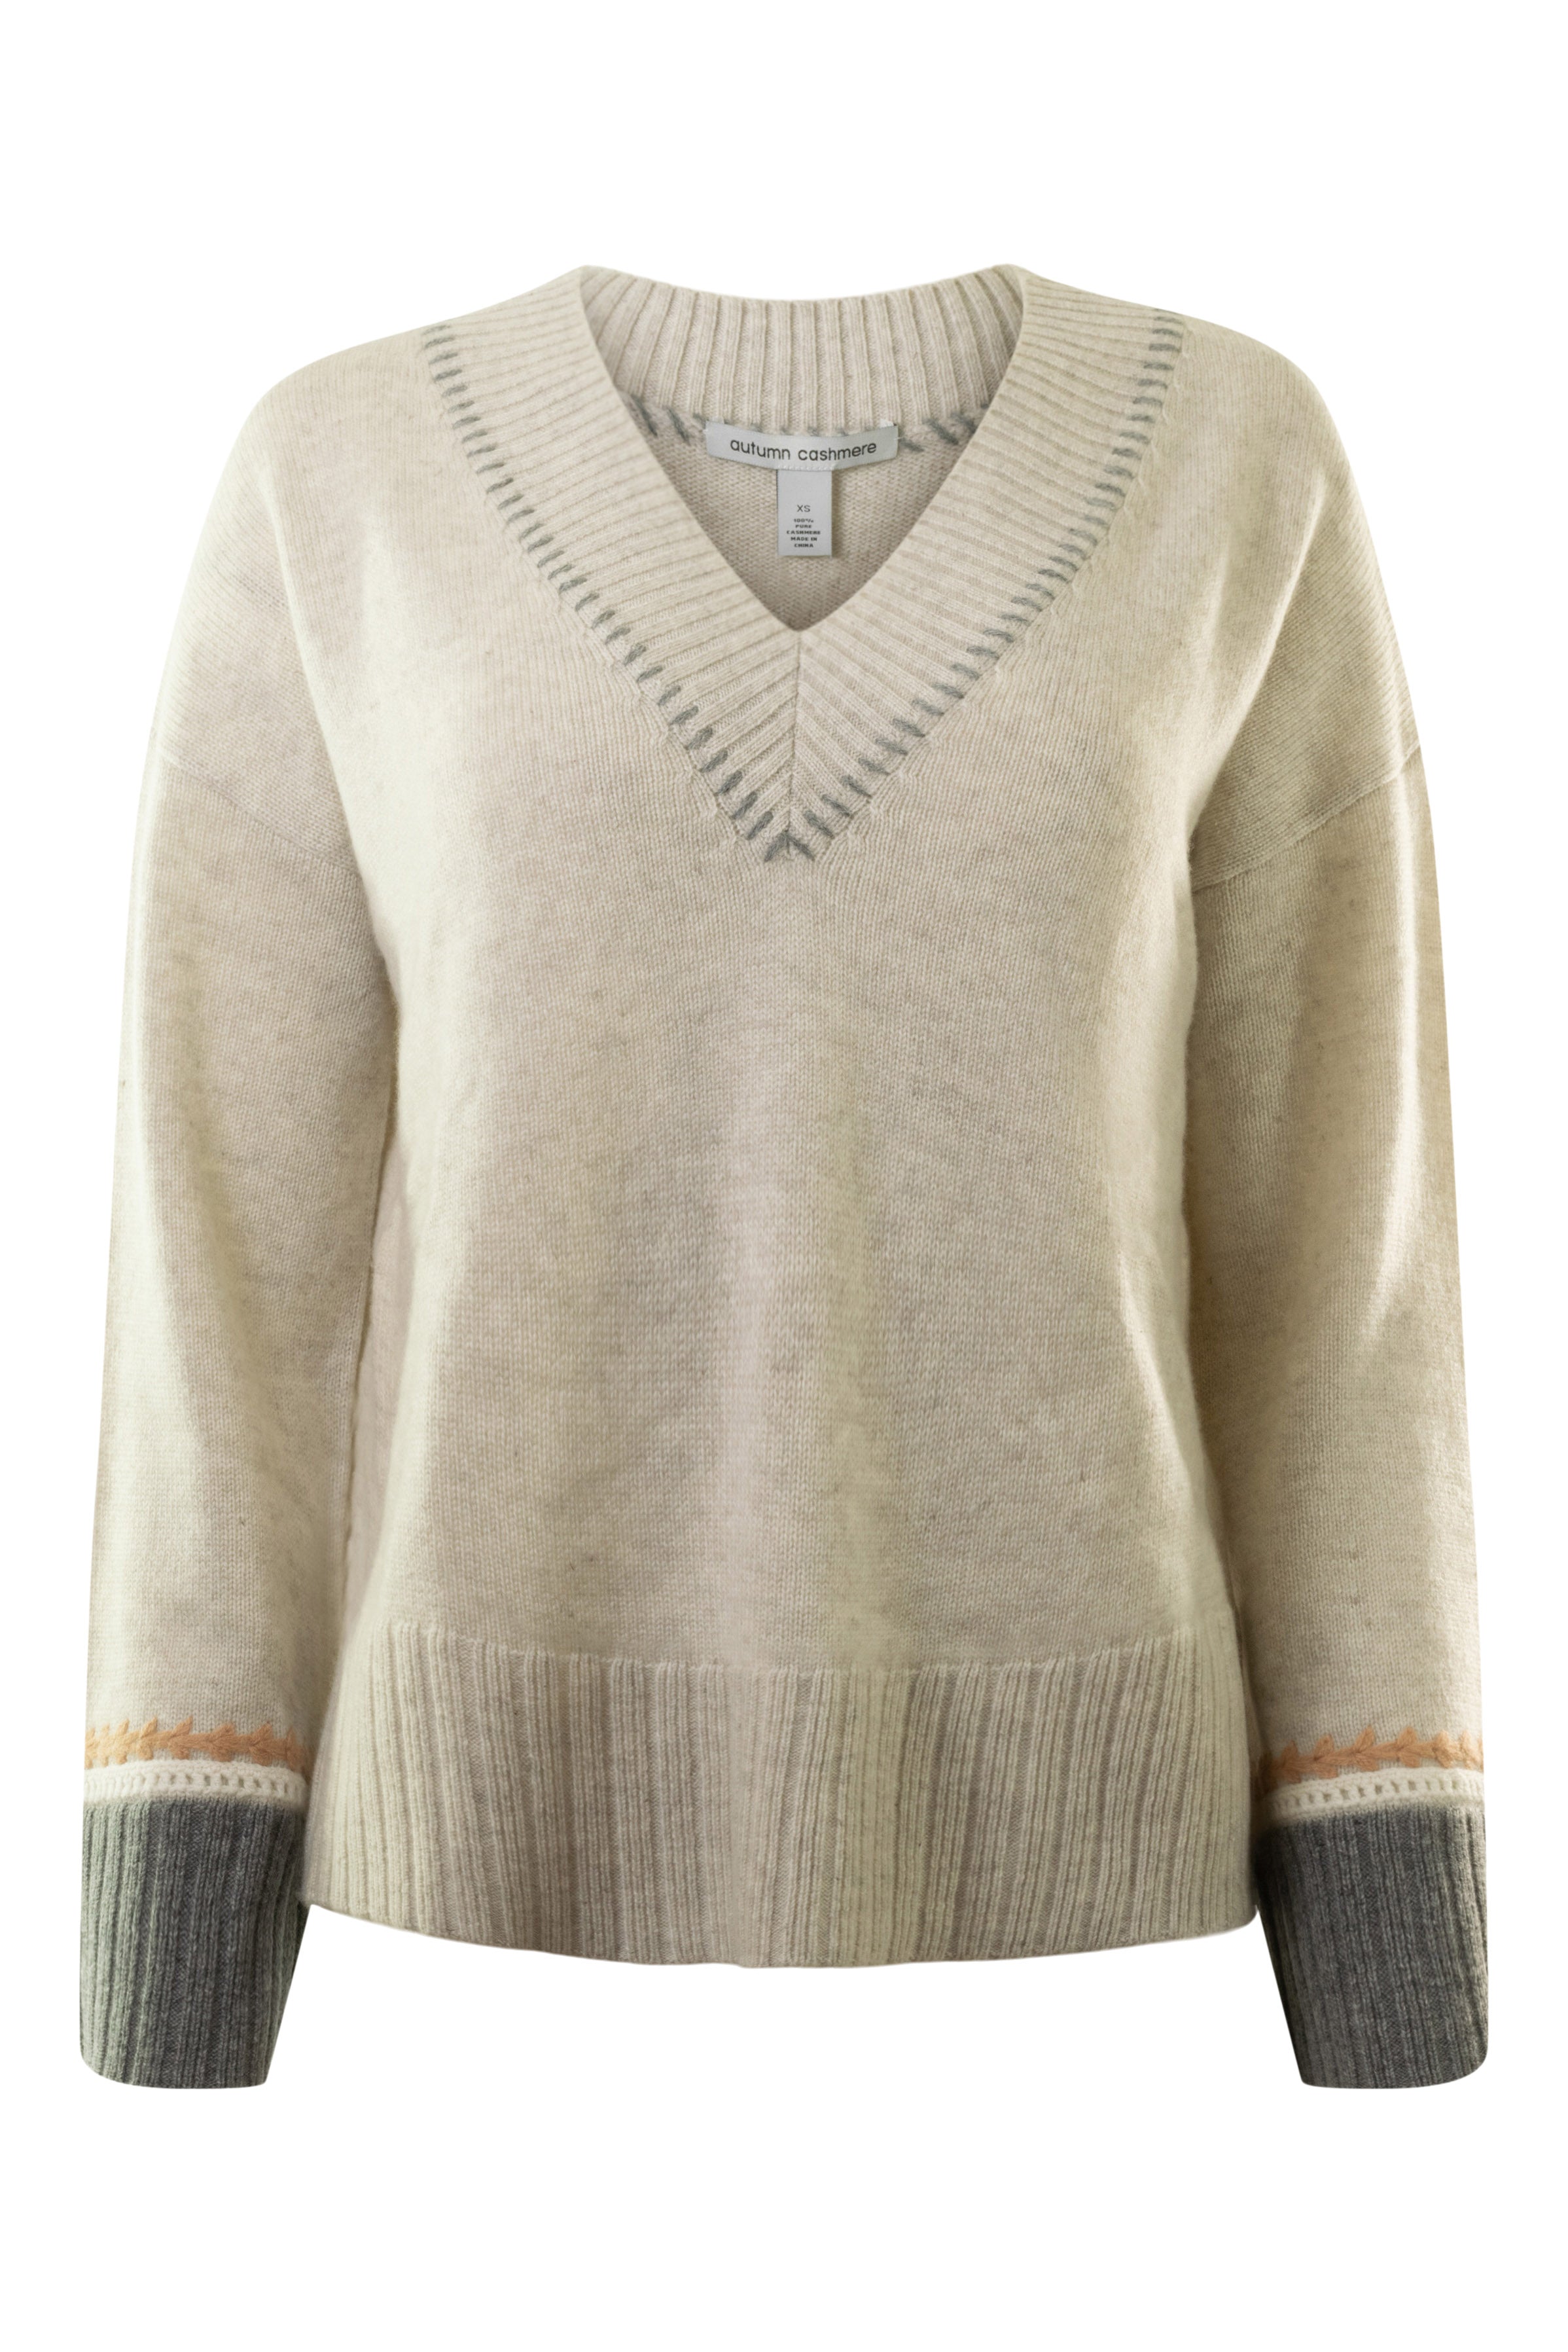 Autumn Cashmere Oversized V-neck with Crochet Details in Mojave / Neutral Combo